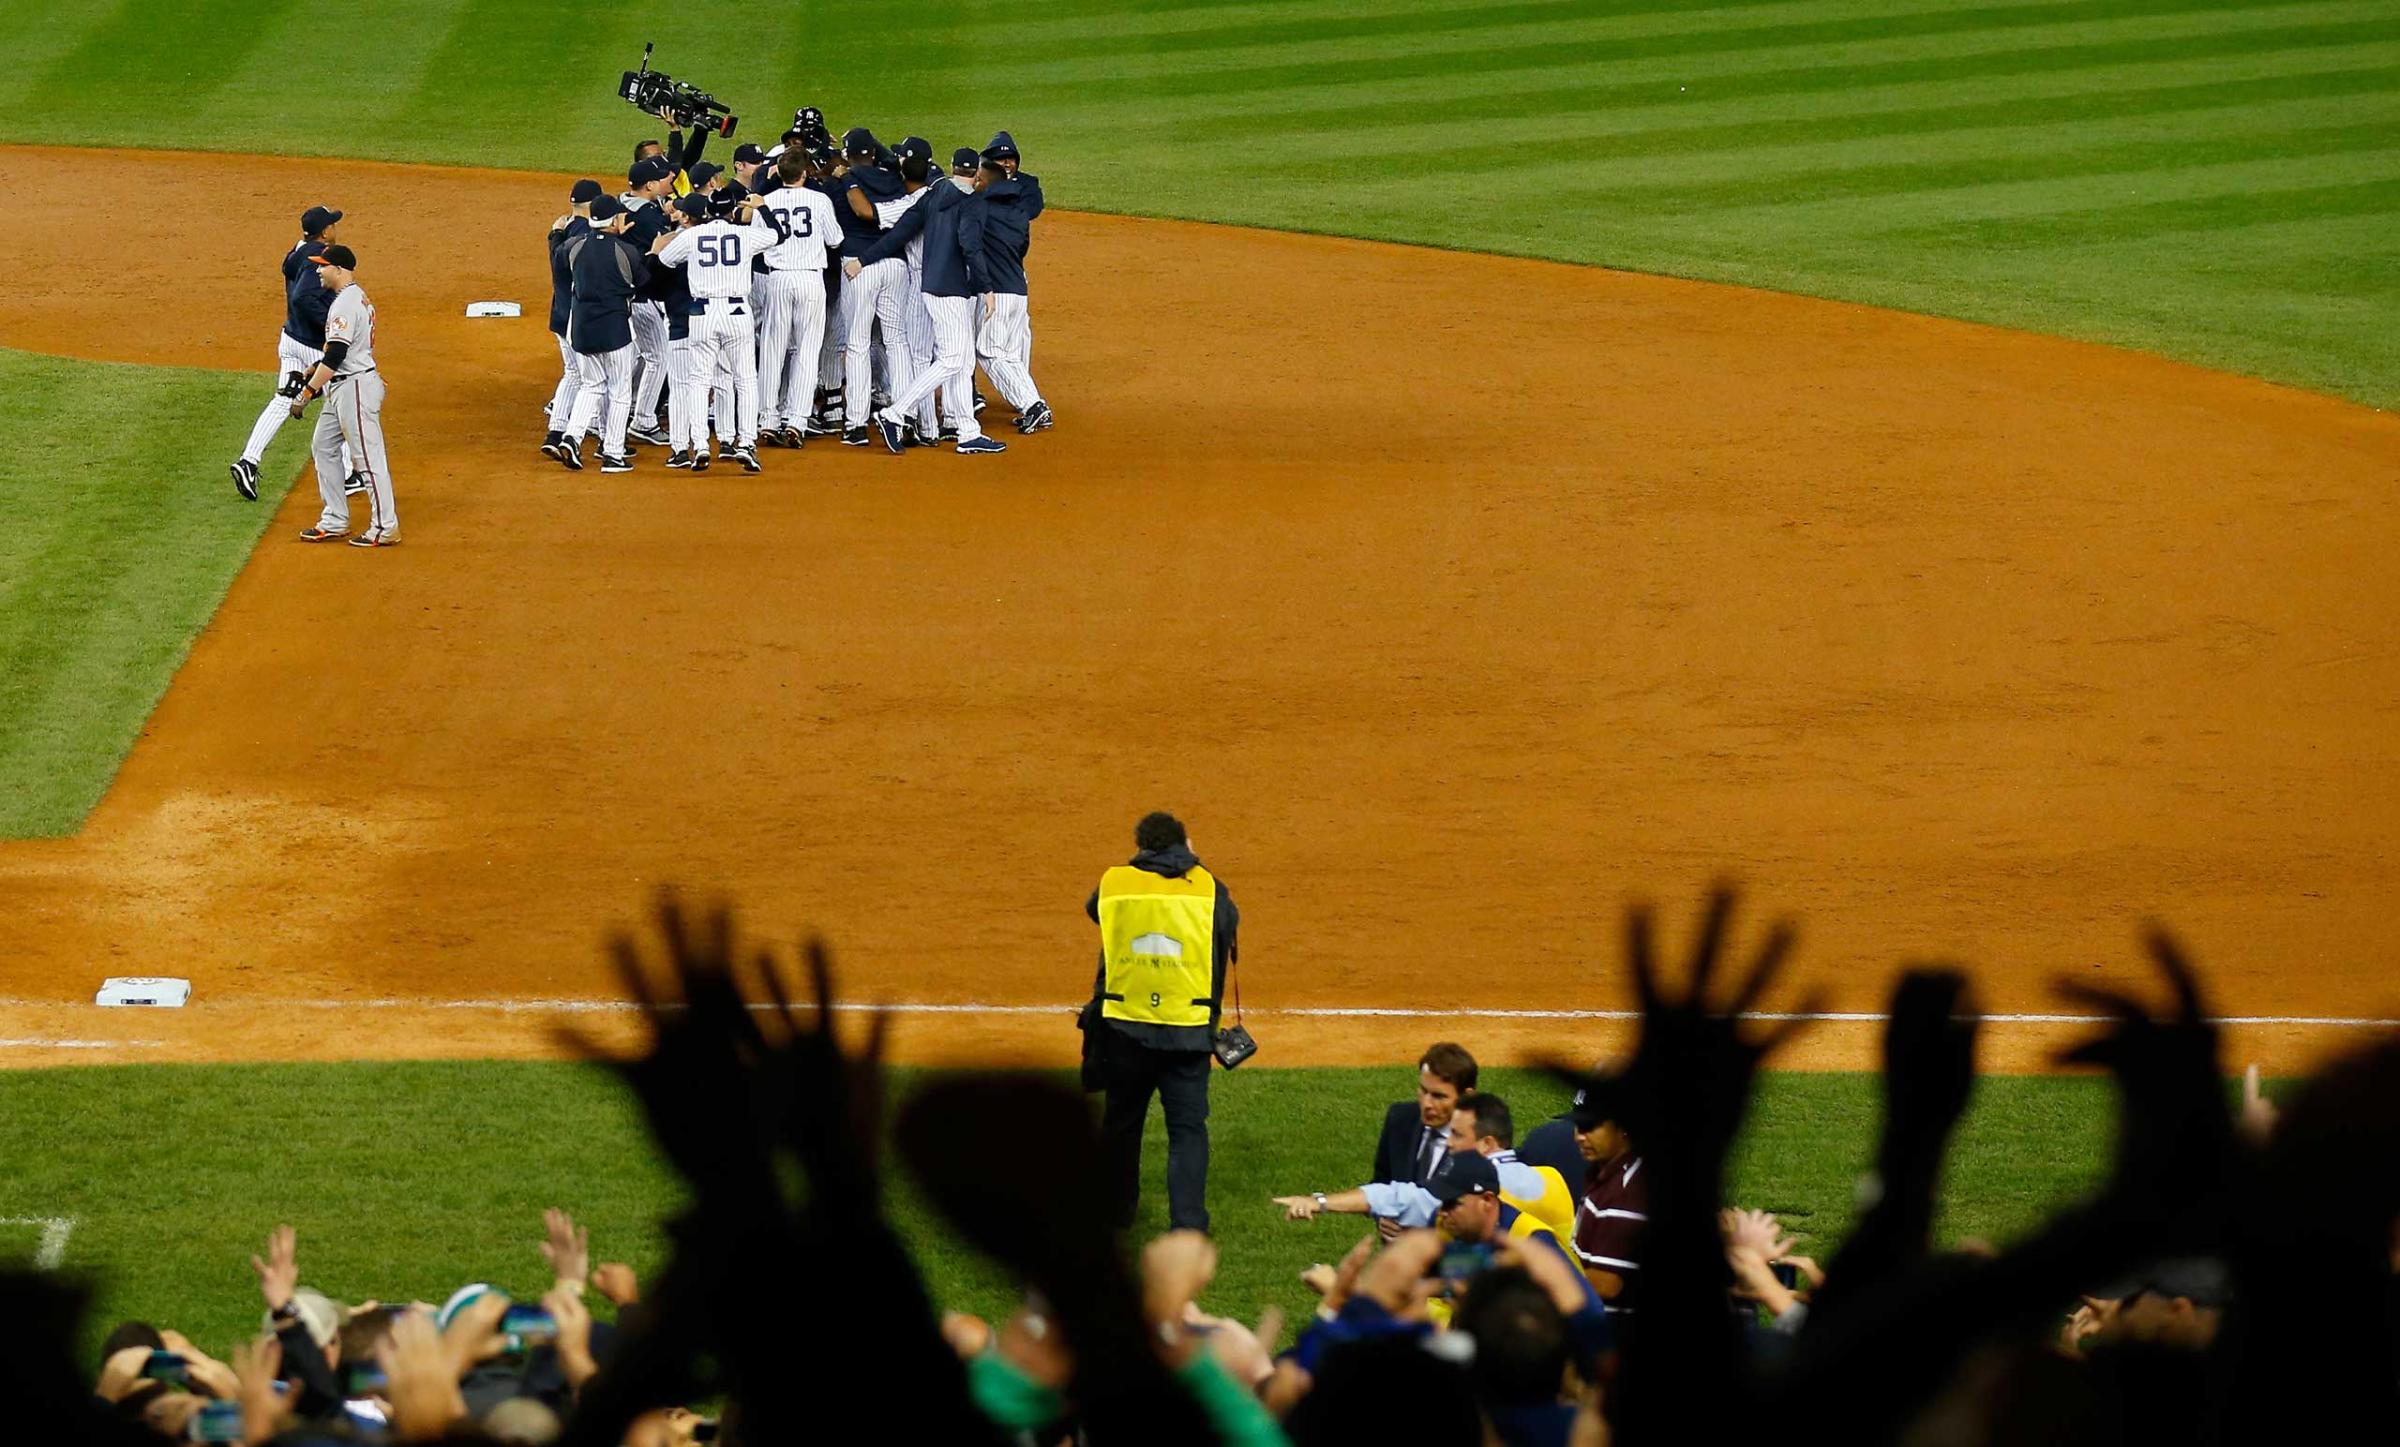 Derek Jeter celebrates with his team after a game winning RBI hit in the ninth inning against the Baltimore Orioles in his last game ever at Yankee Stadium on Sept. 25, 2014.